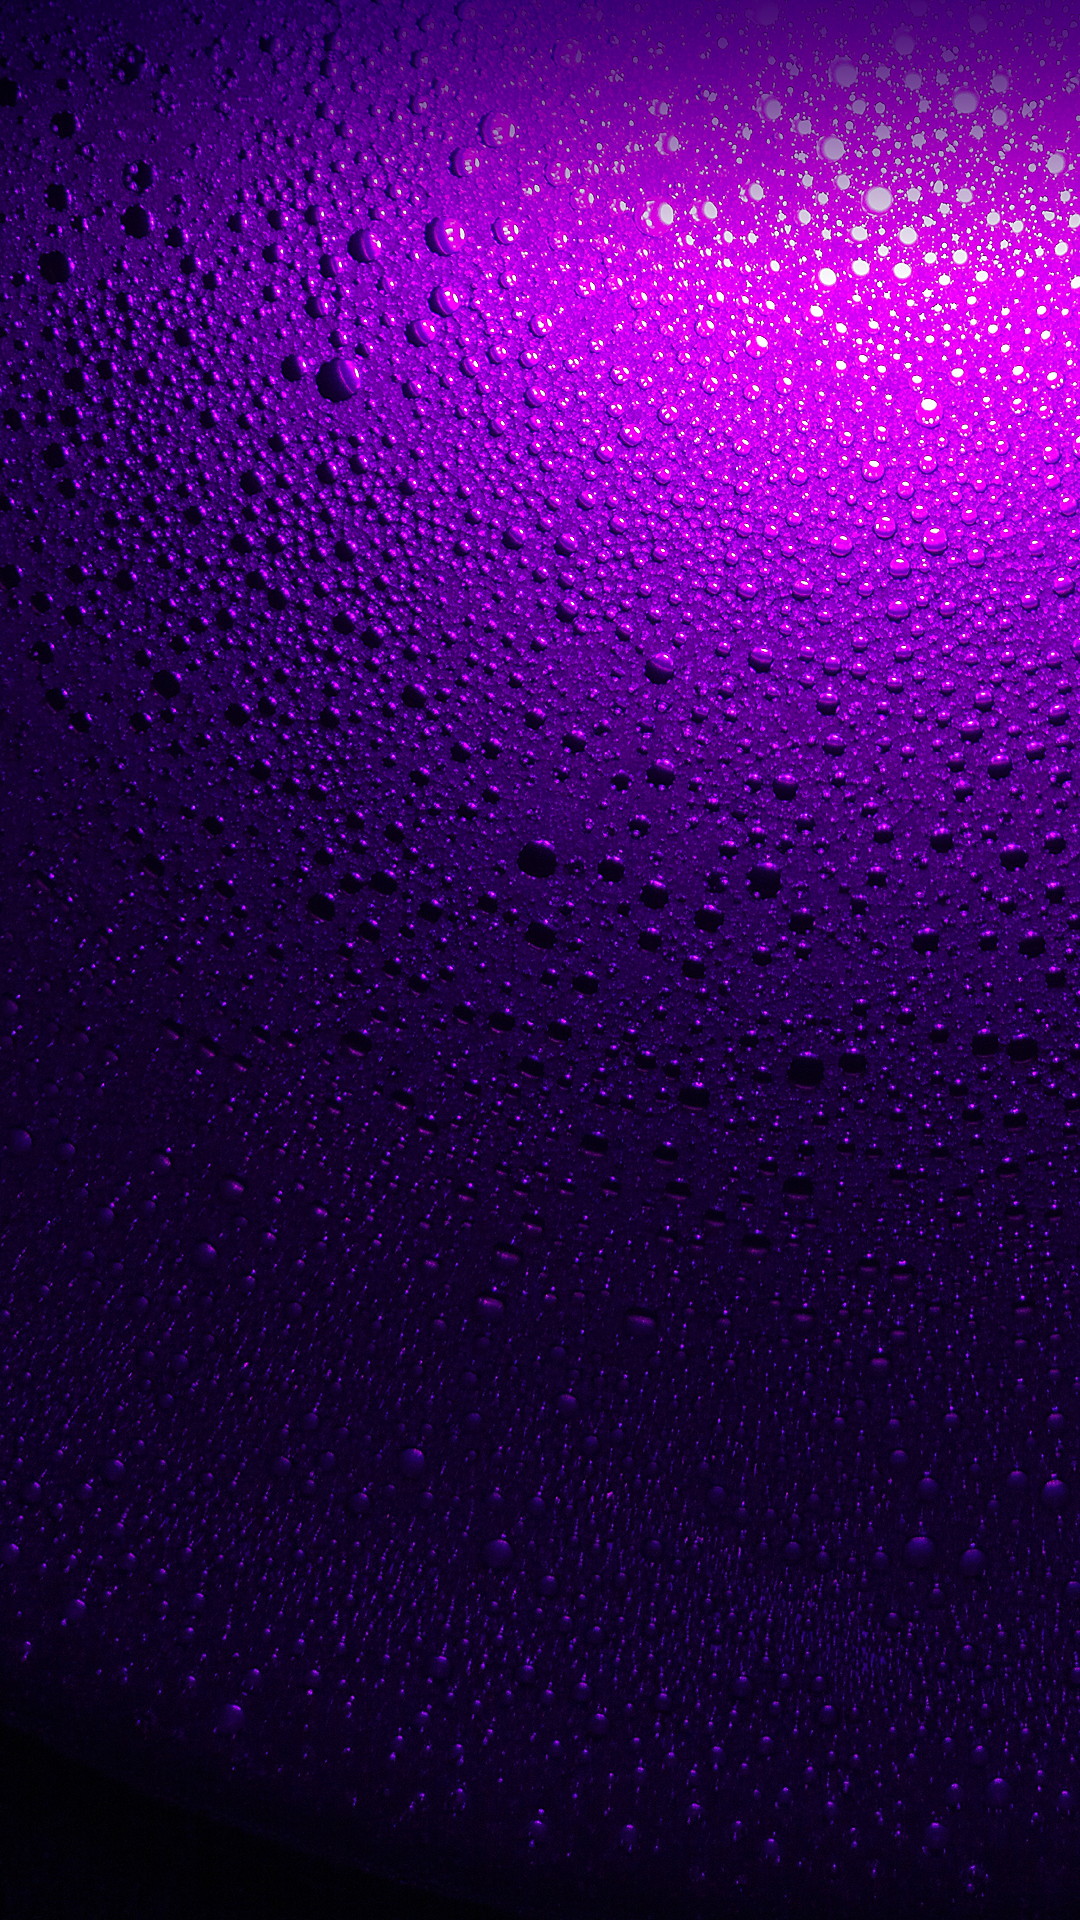 Cool Purple iPhone Wallpaper With high-resolution 1080X1920 pixel. You can set as wallpaper for Apple iPhone X, XS Max, XR, 8, 7, 6, SE, iPad. Enjoy and share your favorite HD wallpapers and background images